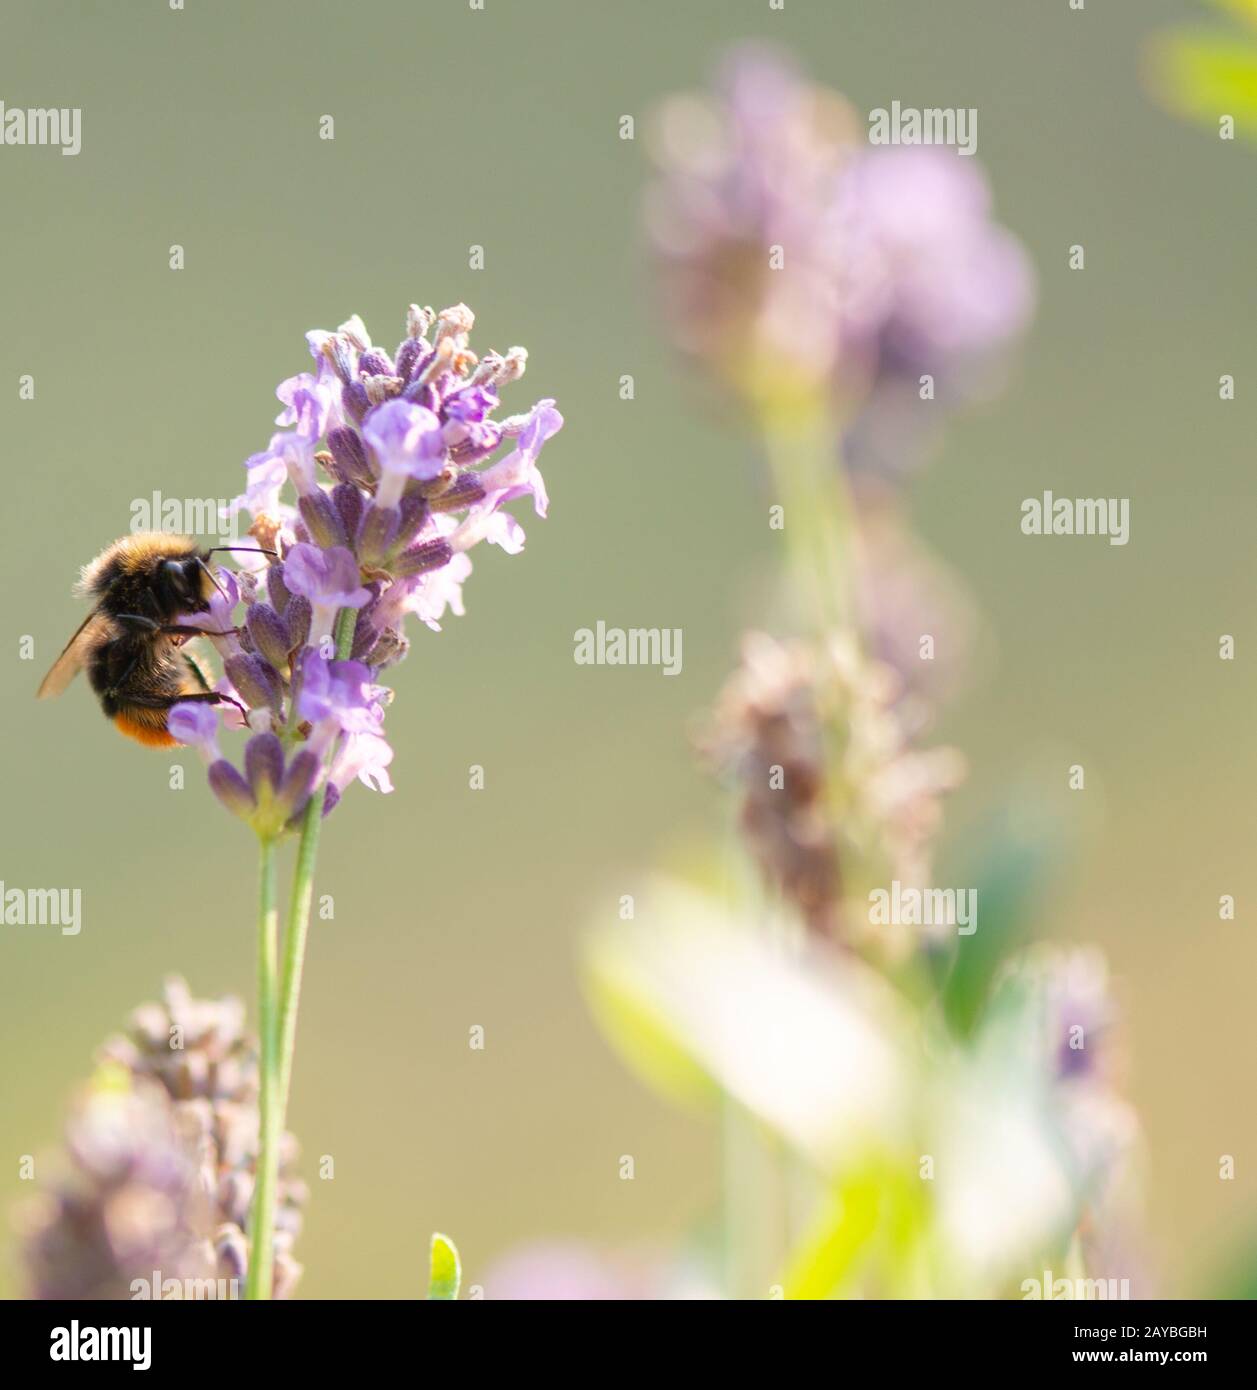 bumble bee searching for food, Macrophotography Stock Photo